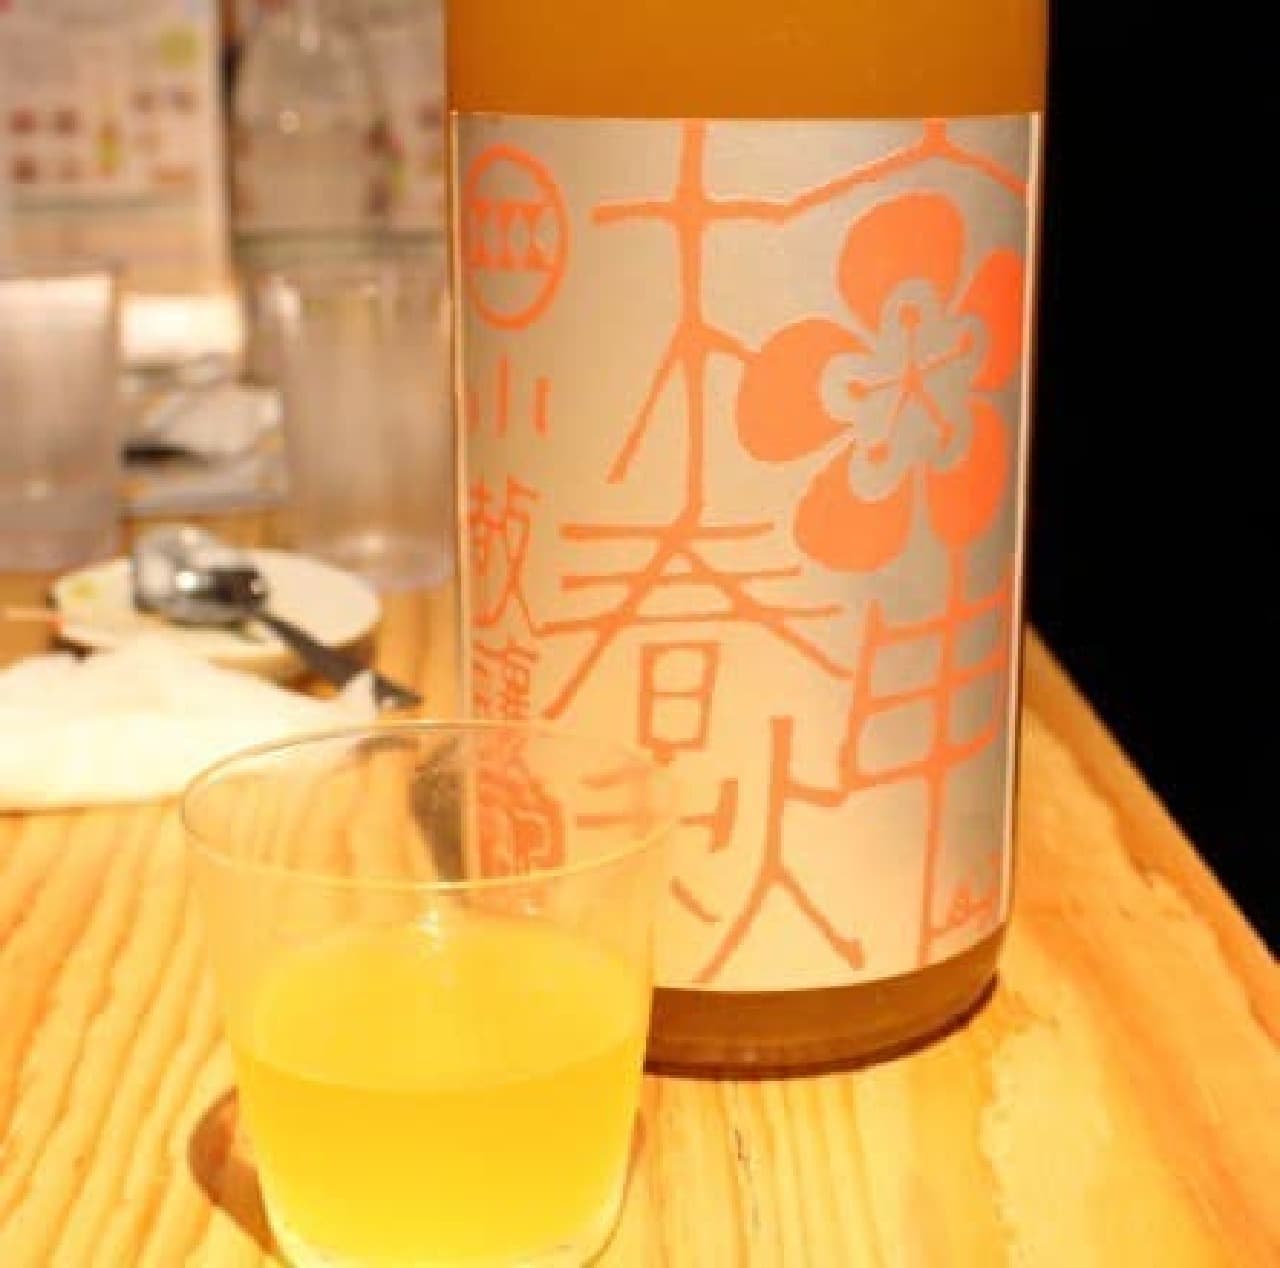 Would you like to toast with "Umeshin Shunshu"? It's the year of the monkey, and "Saruume" is a lucky charm.